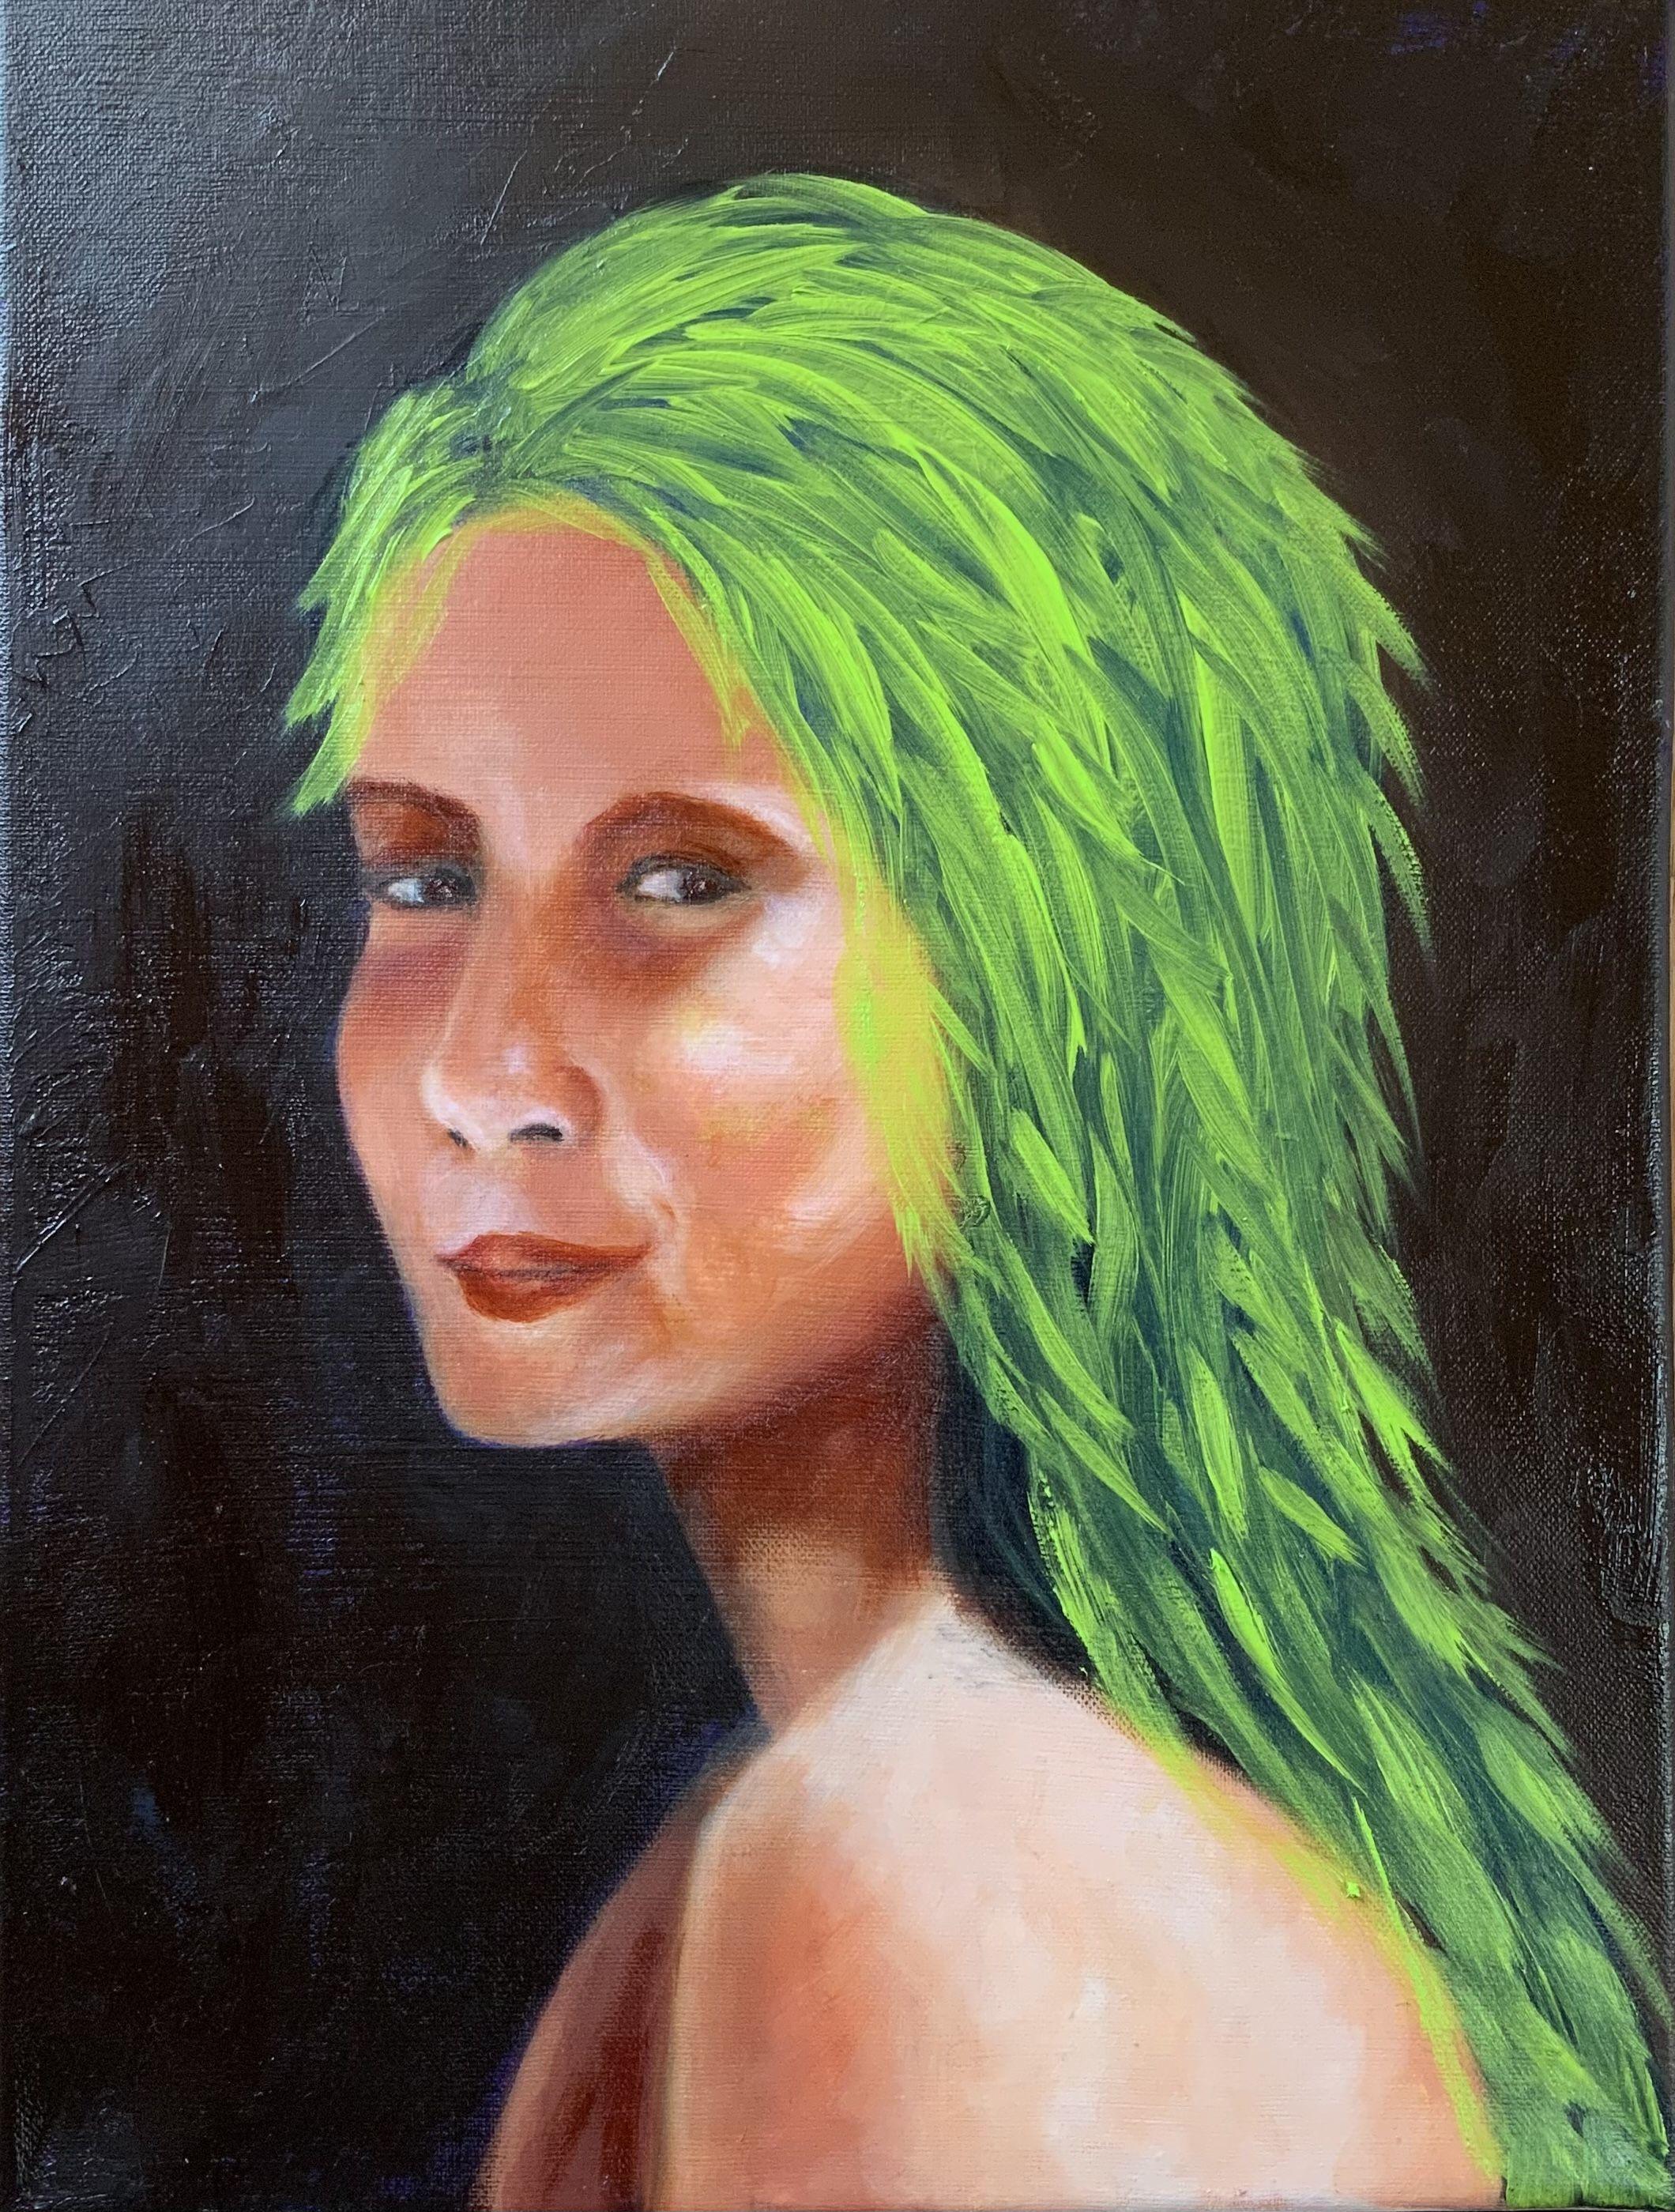 A young girl got a new hair style, it is now green. She looks a little bit confused, but funny. I think she is happy with her new freedom. It is not an easy decision! :: Painting :: Realism :: This piece comes with an official certificate of